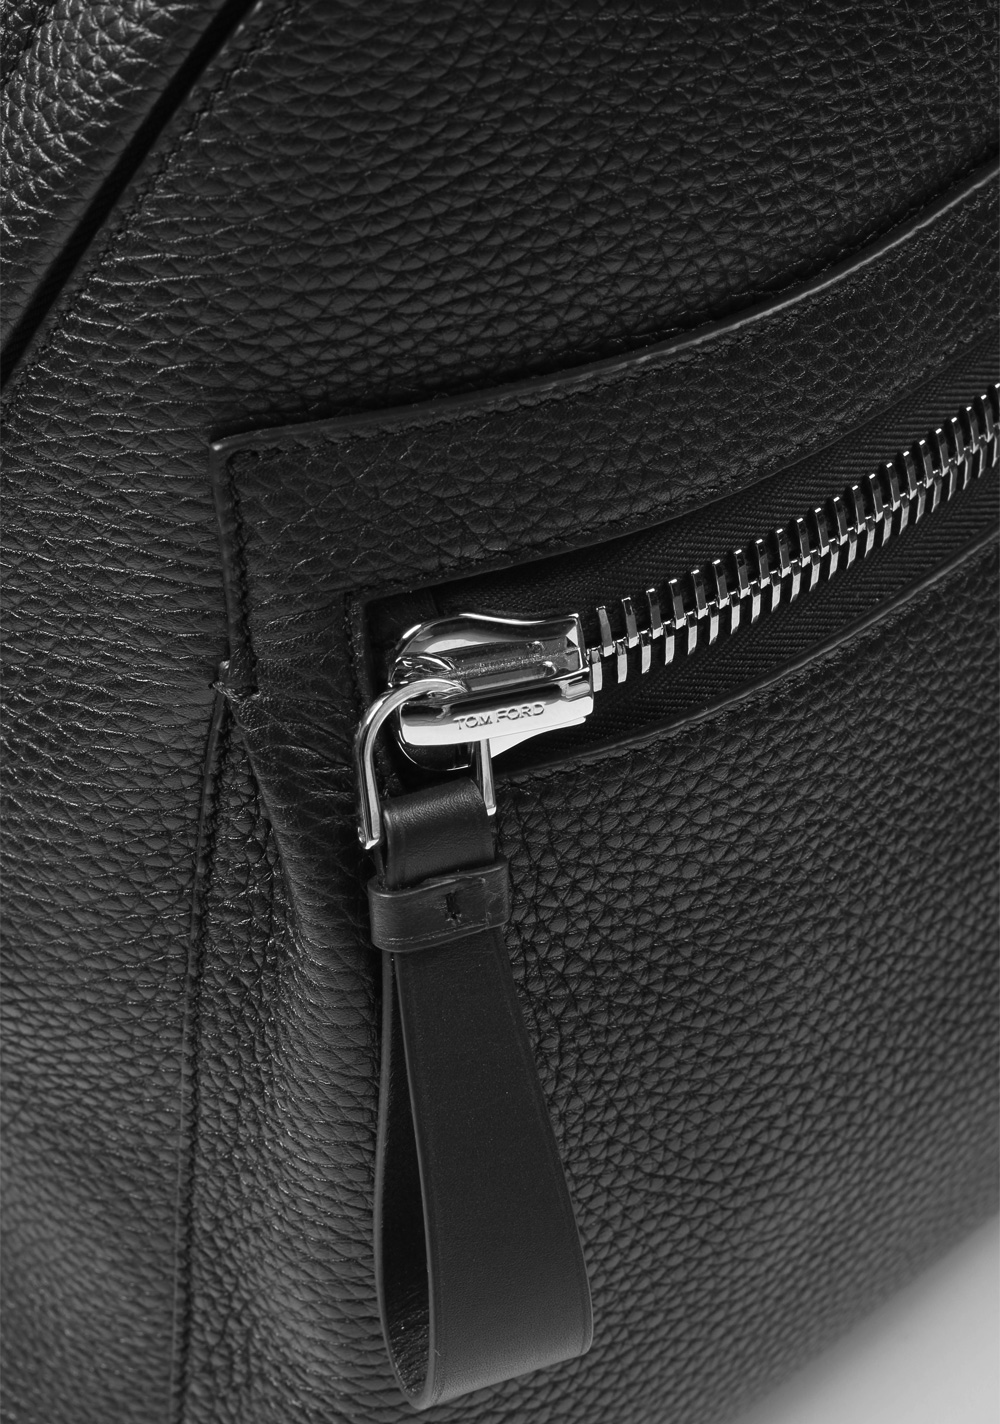 TOM FORD Buckley Black Grained Leather Backpack Bag | Costume Limité